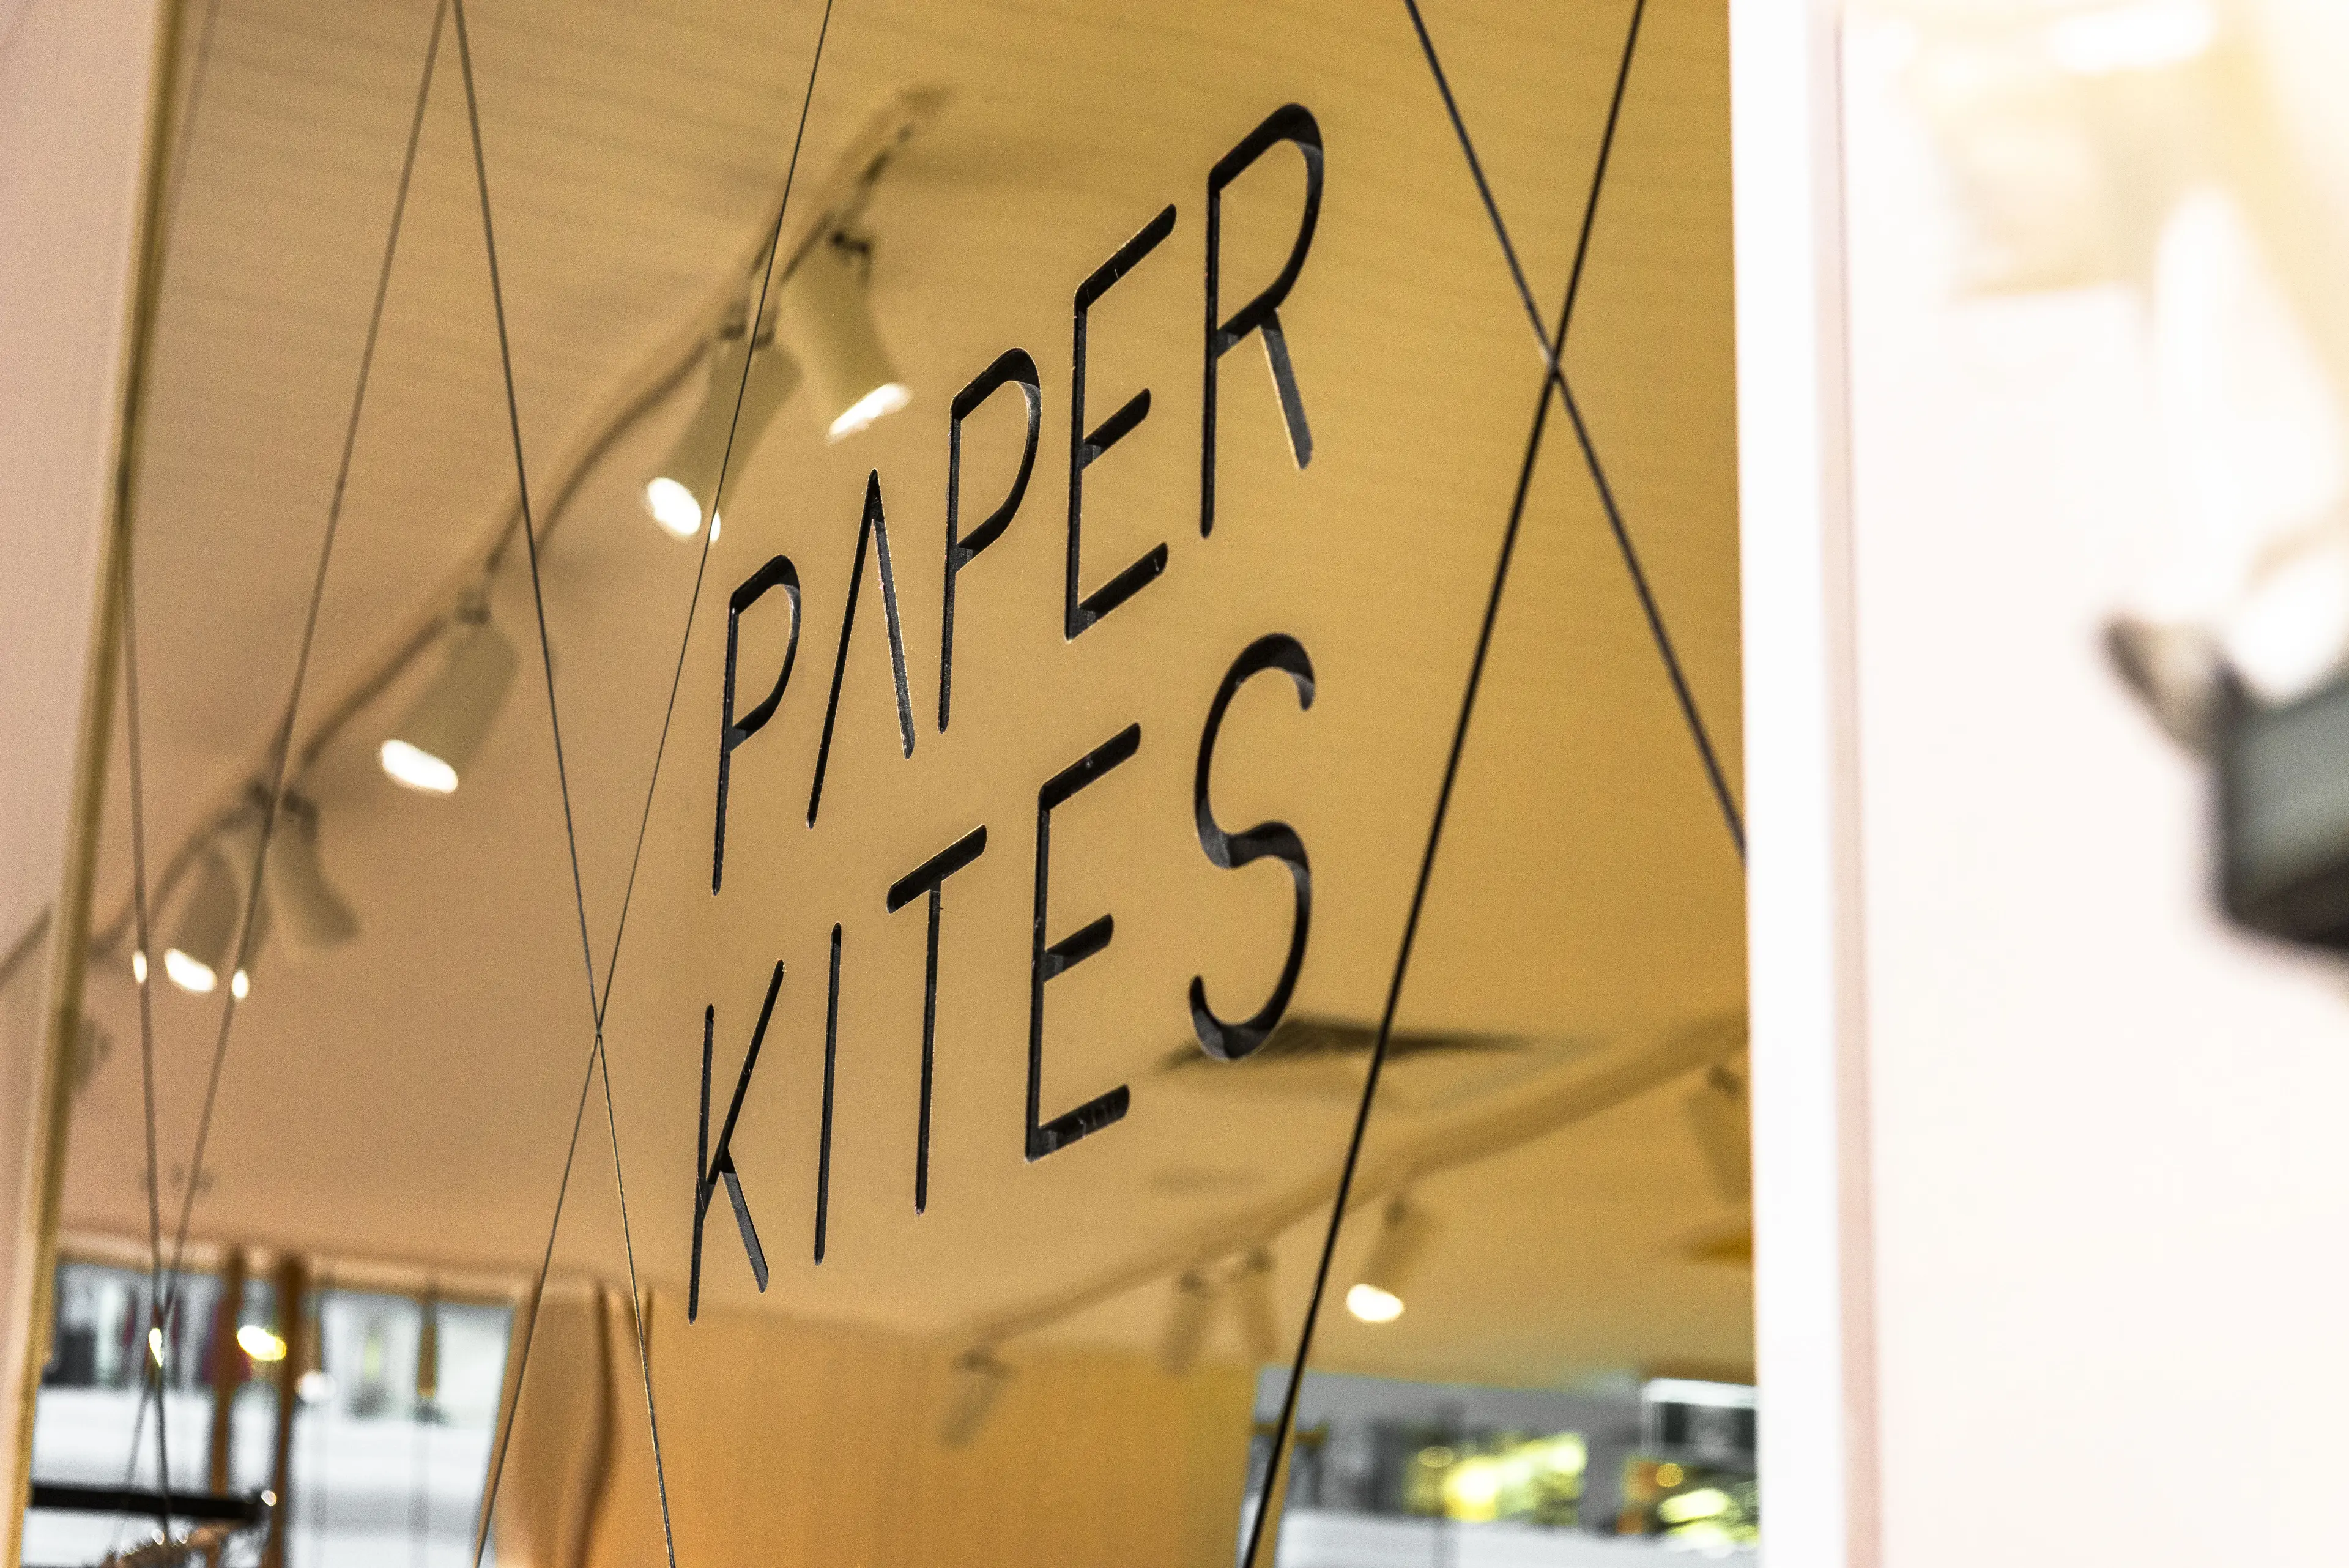 Paper Kites - retail interior design, joinery and project management - Eastland Shopping Centre, Ringwood, Melbourne, Australia